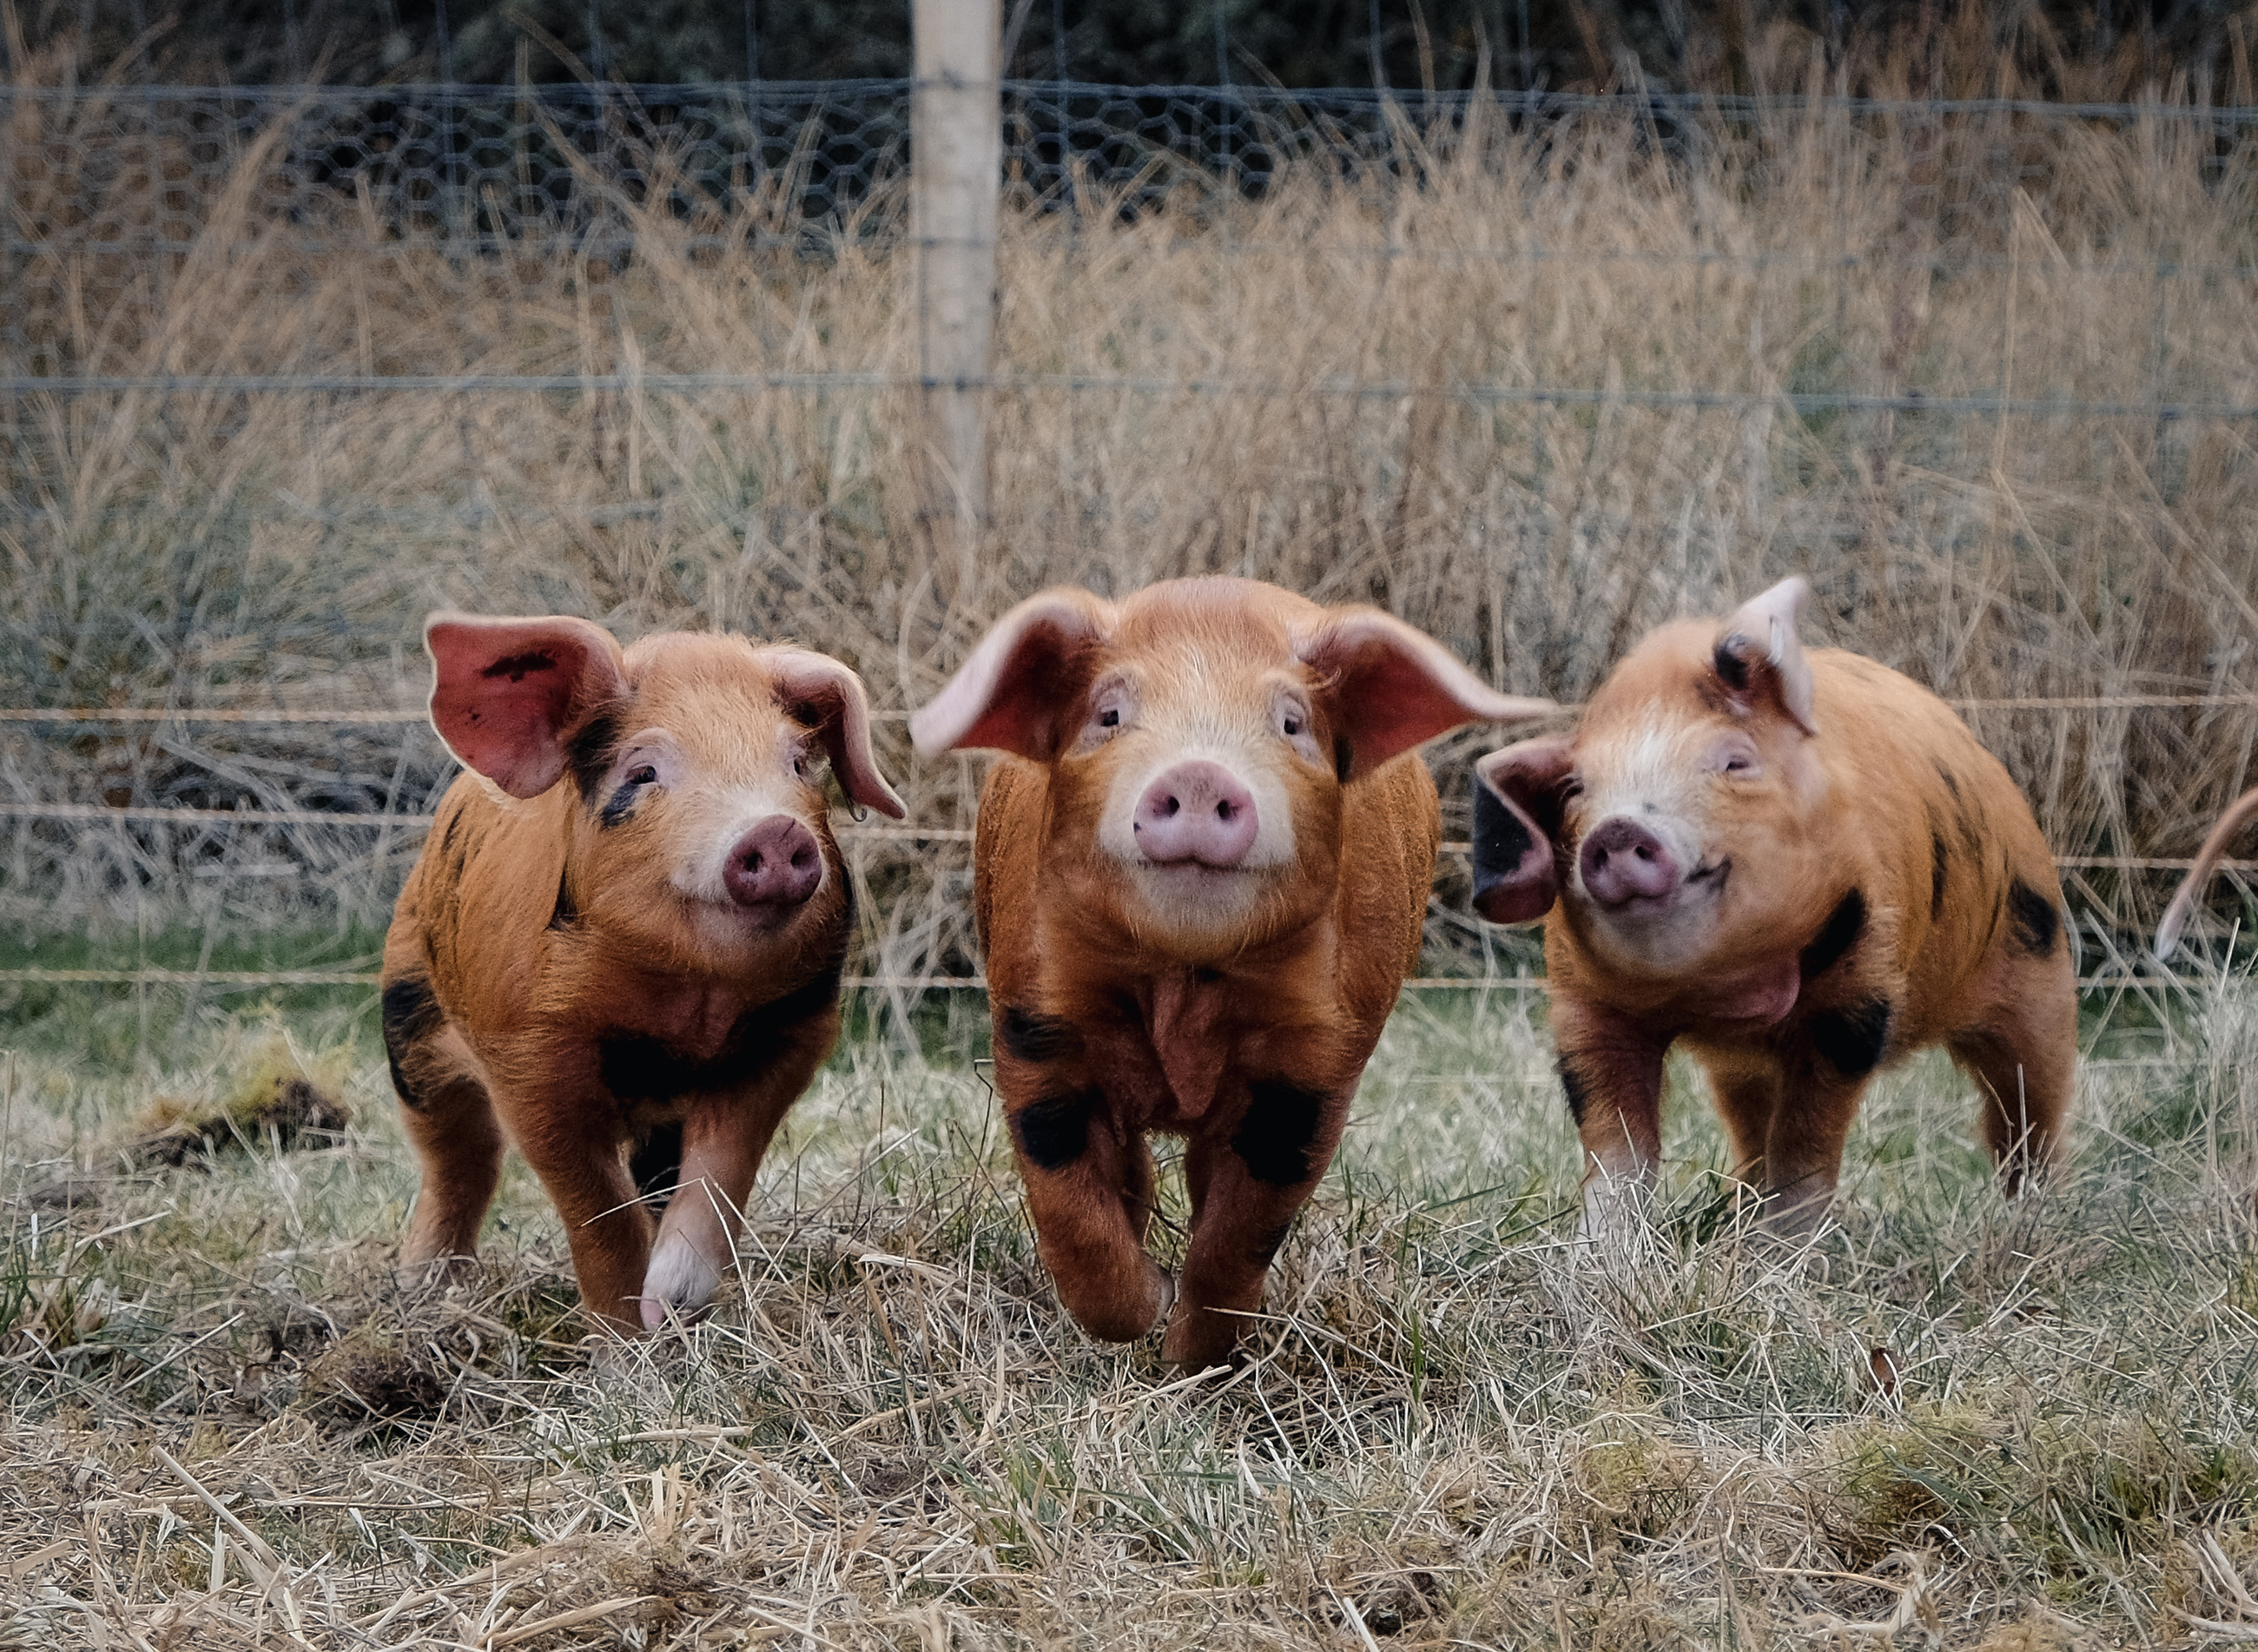 What are the benefits of farming with pigs?